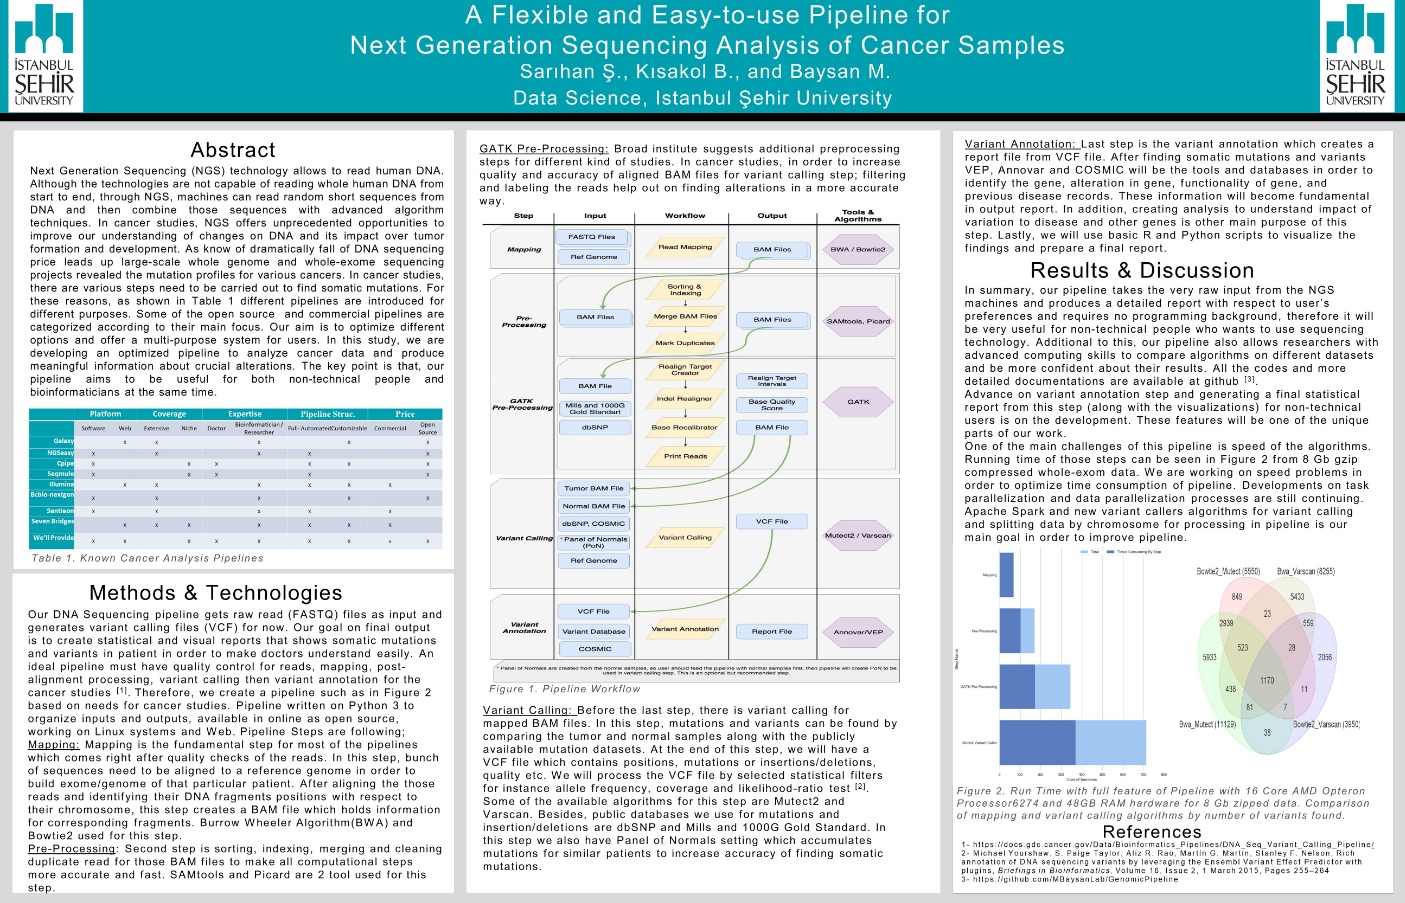 A Flexible and Easy-to-use Pipeline for Next Generation Sequencing Analysis of Cancer Samples